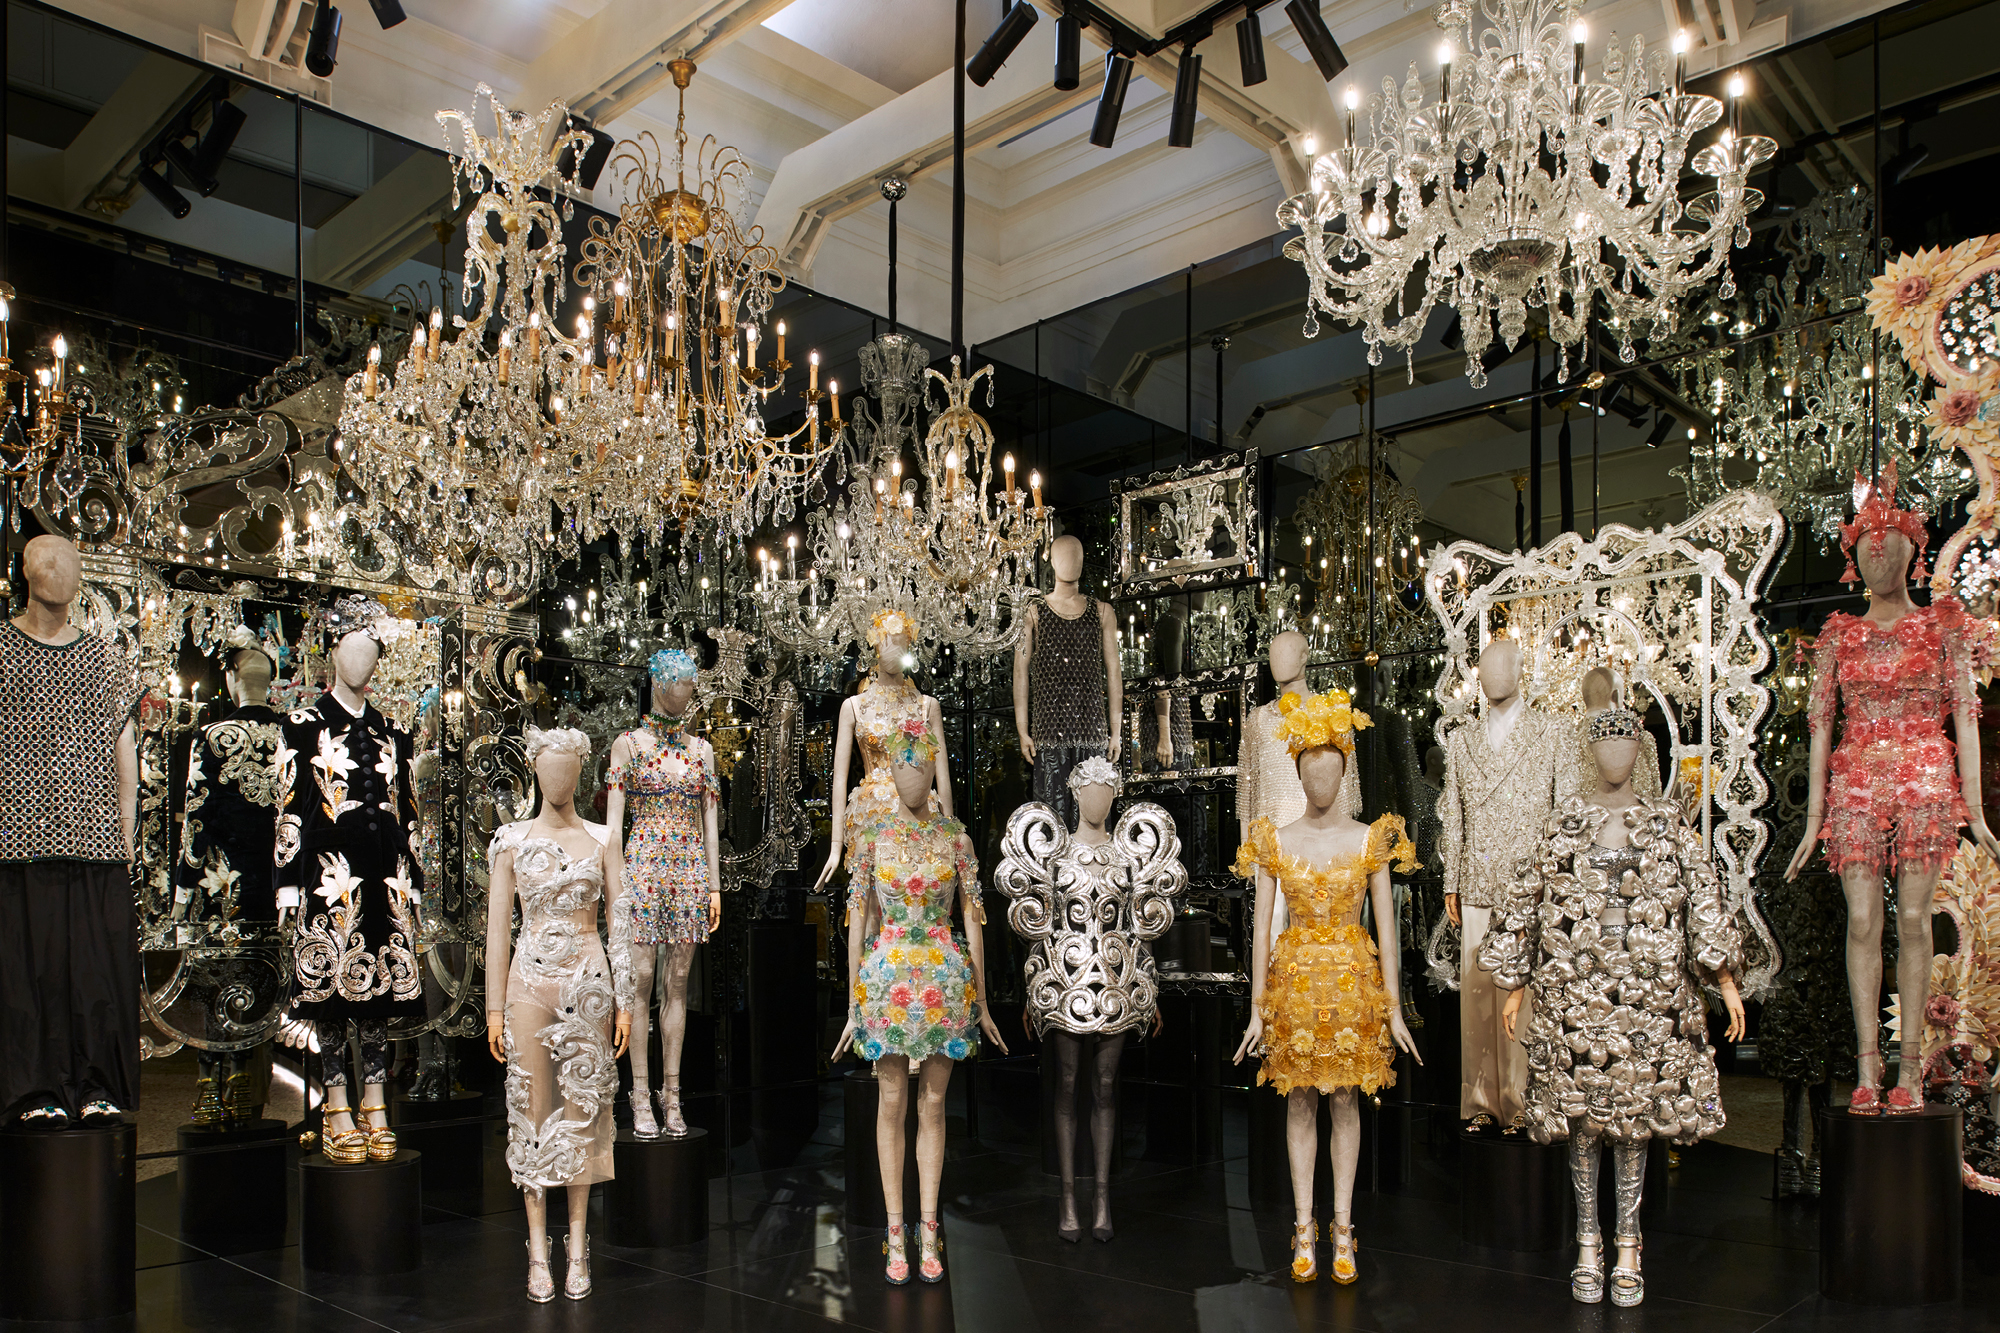 Throughout, Dolce & Gabbana’s distinctive clothes and jewellery are drawn exclusively from the couture collections